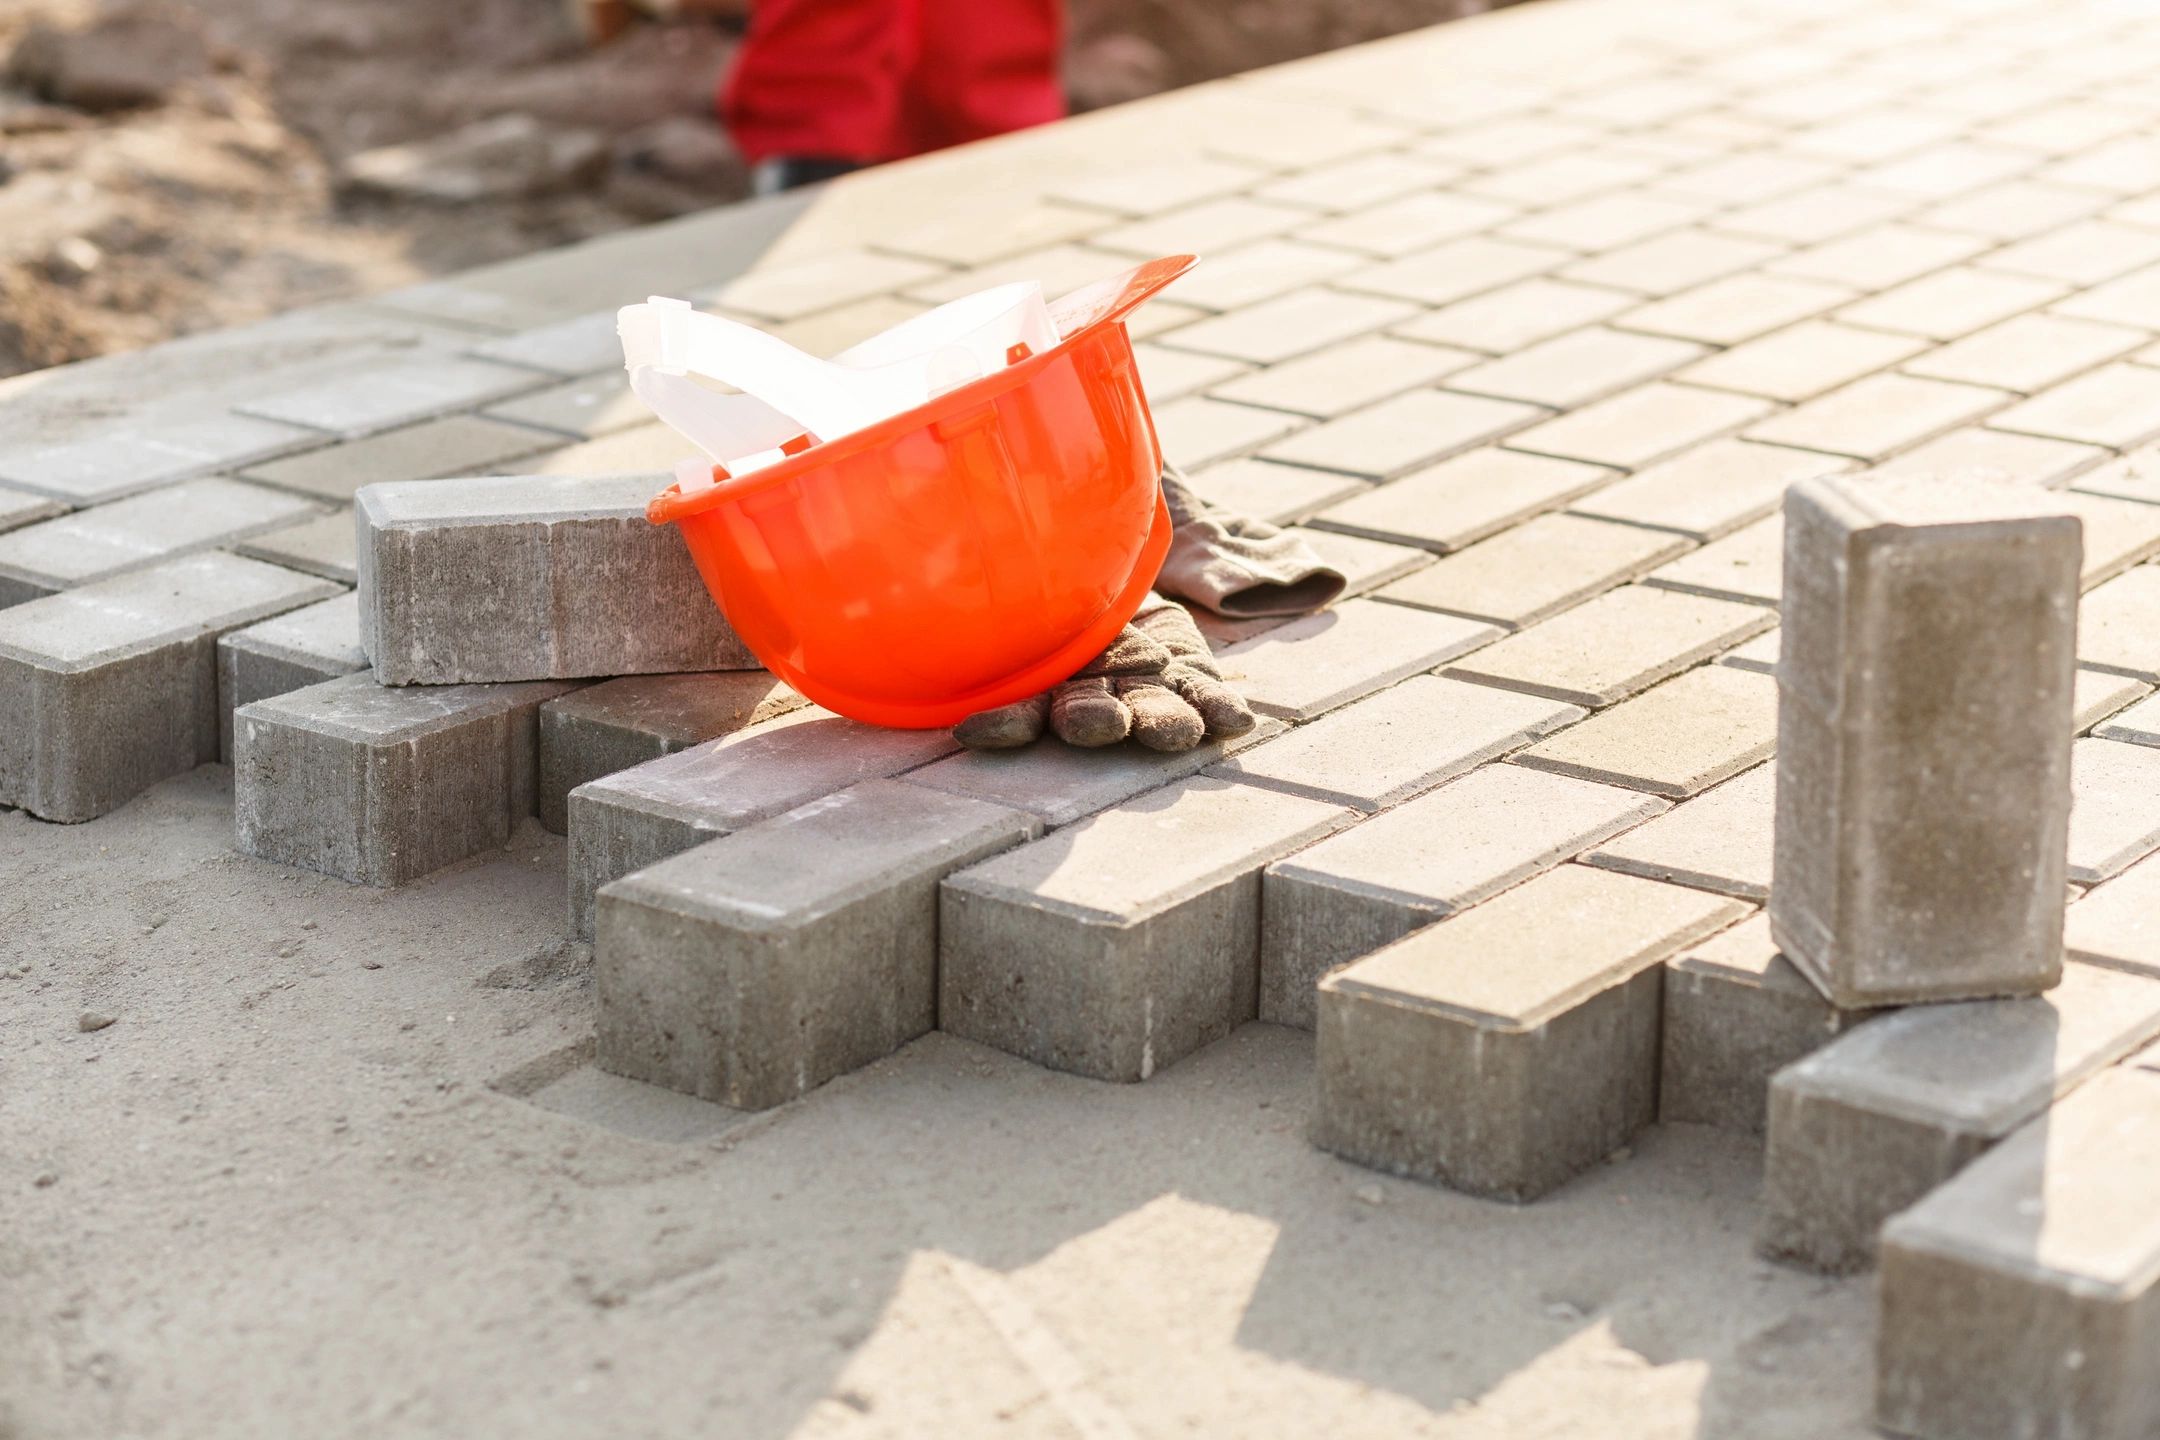 Northend Pavers are a well-known brick paving company operating from Mandurah to Perth.